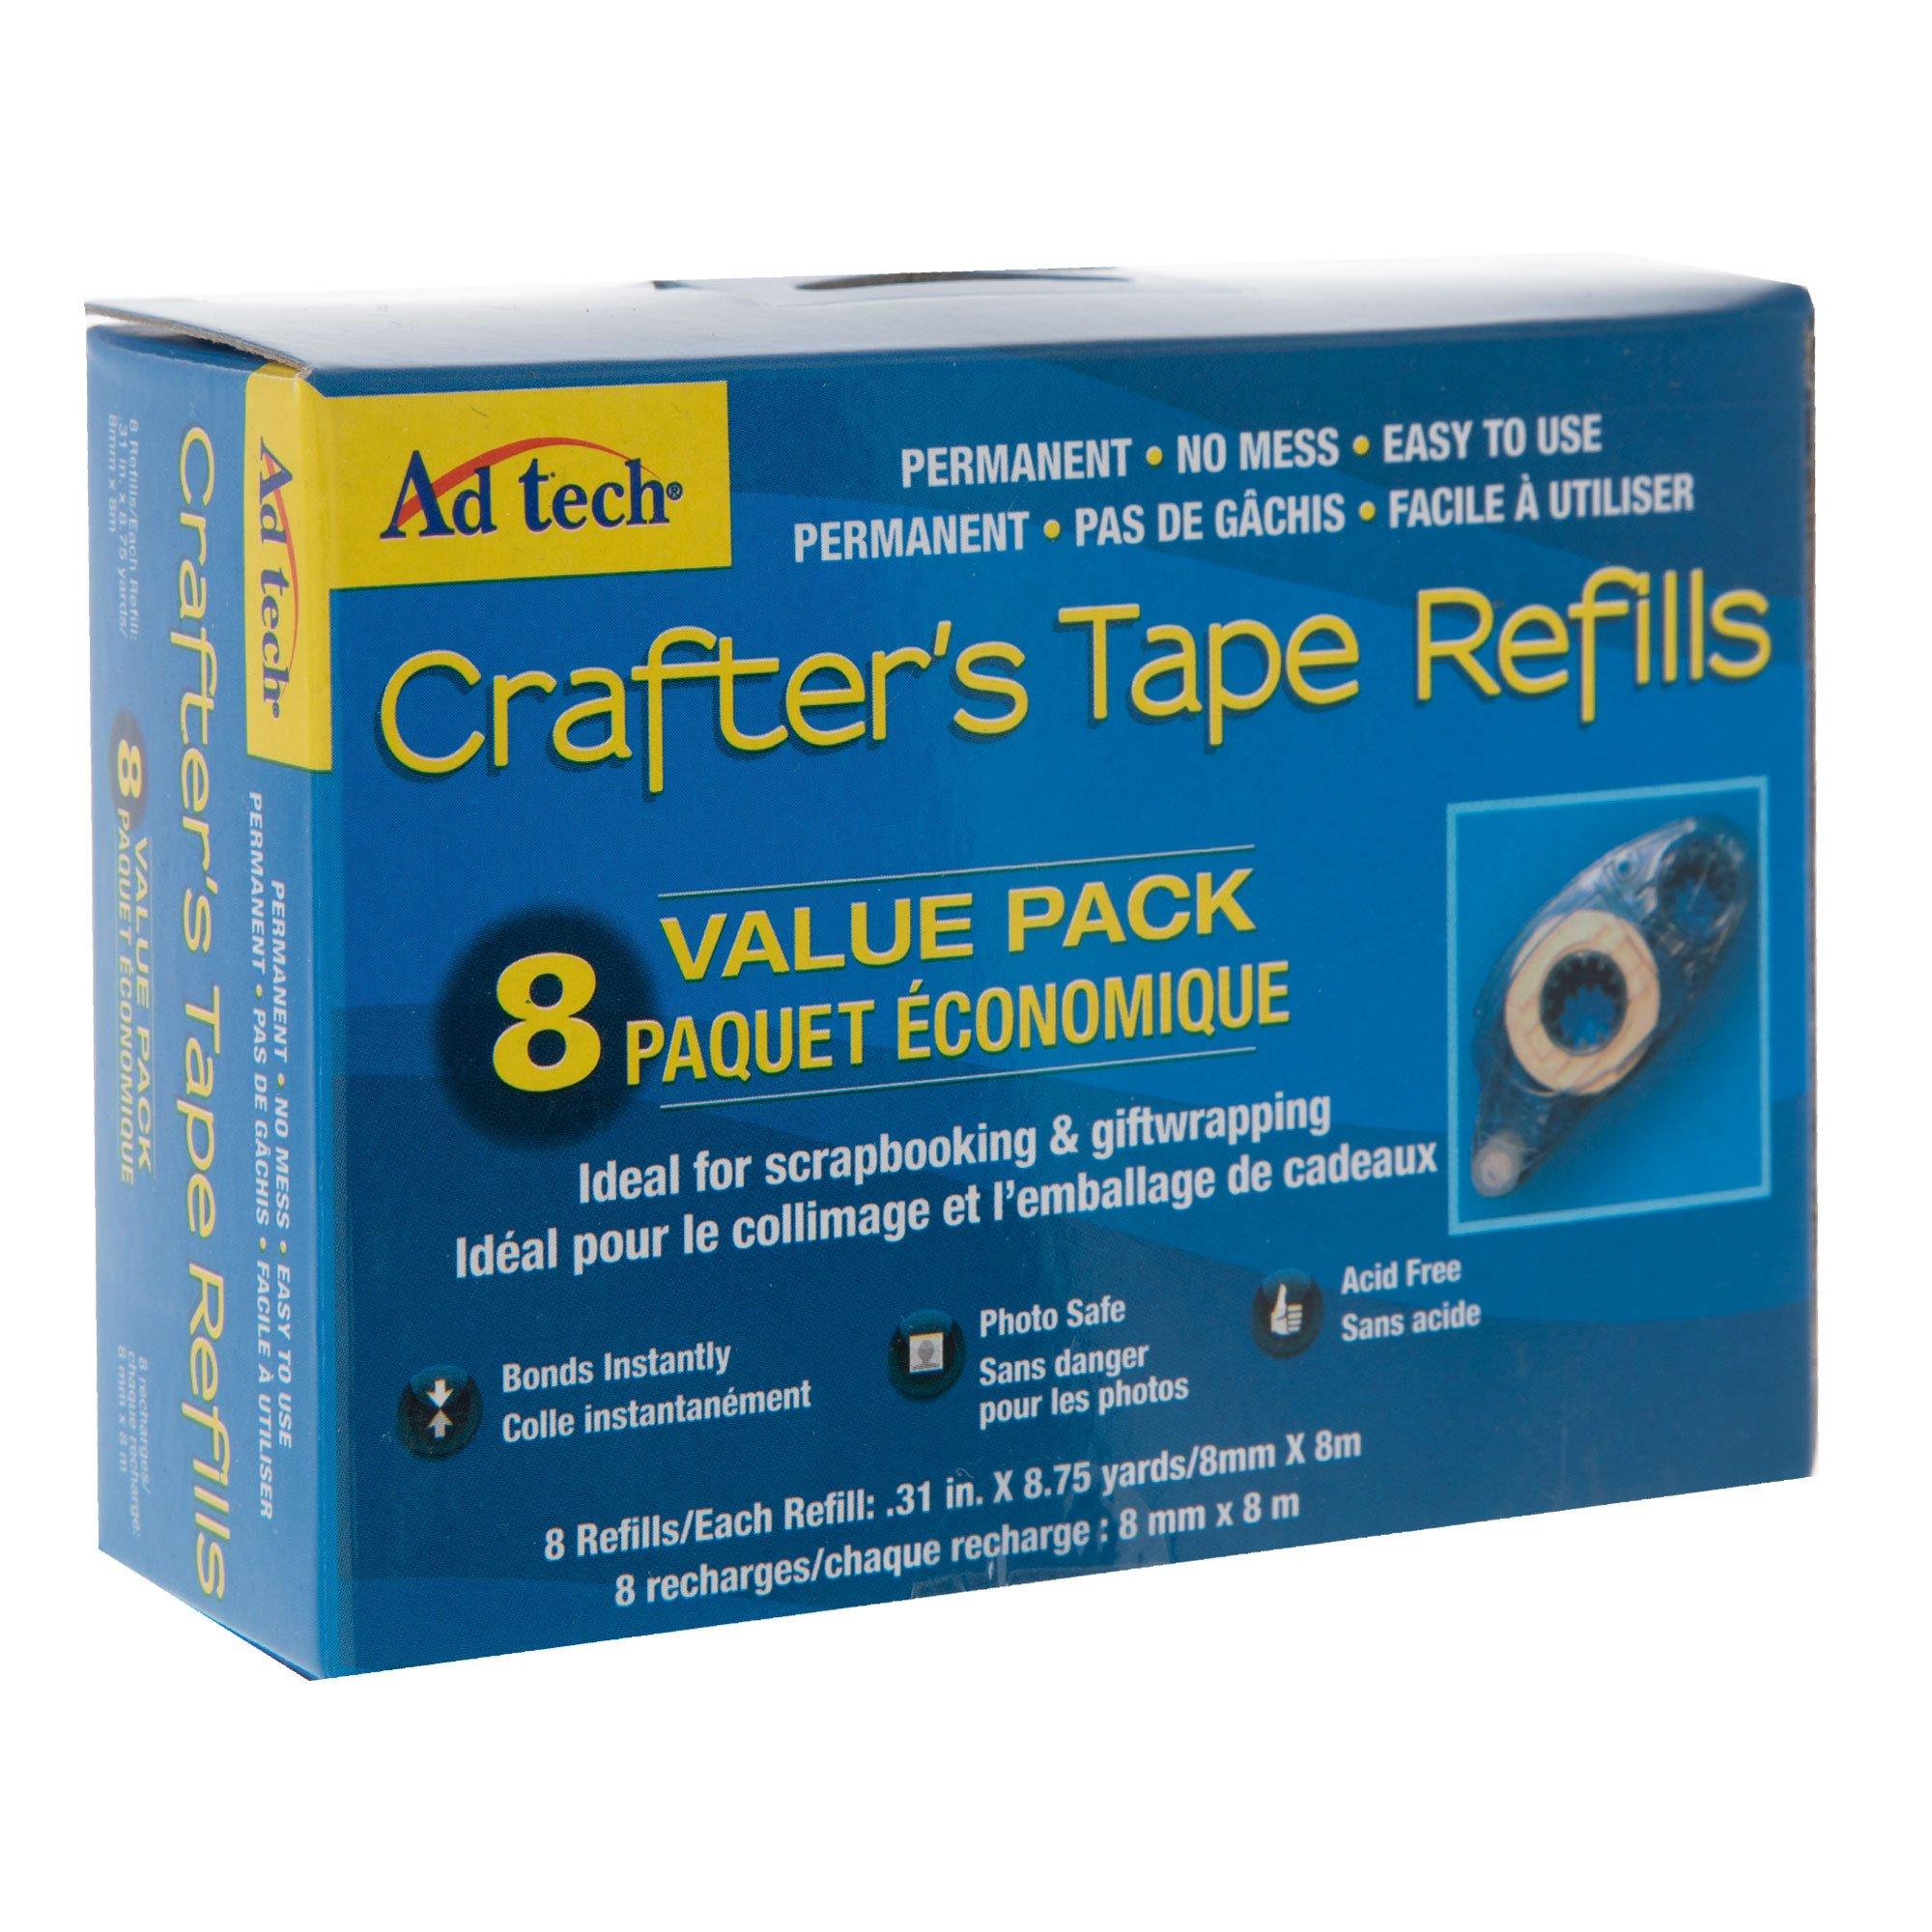 12 Packs: 8 ct. (96 total) AdTech™ Crafter's Tape™ Refill Value Pack